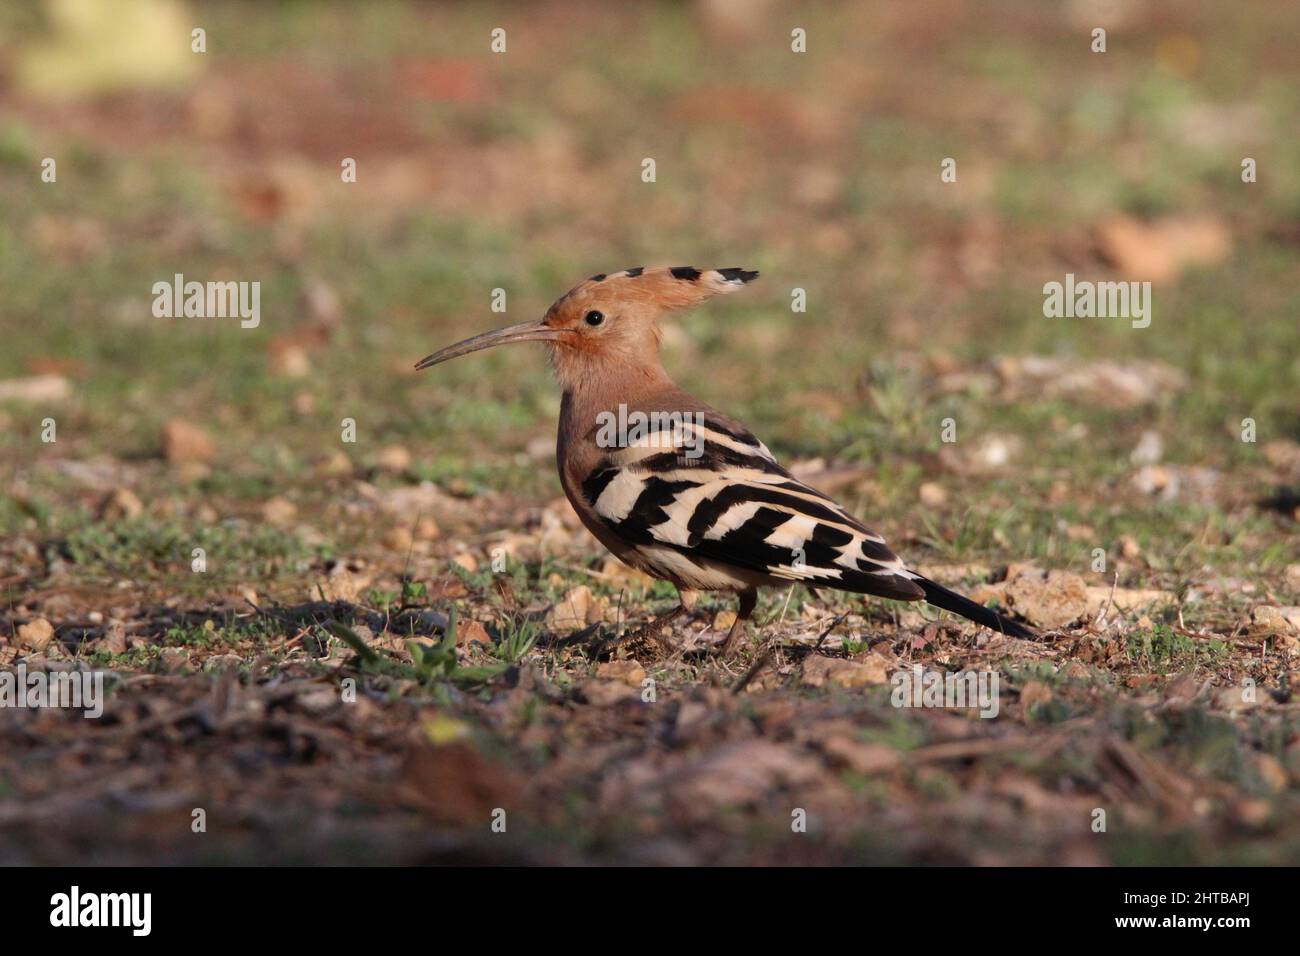 A shallow focus close-up of a hoopoe on the ground Stock Photo